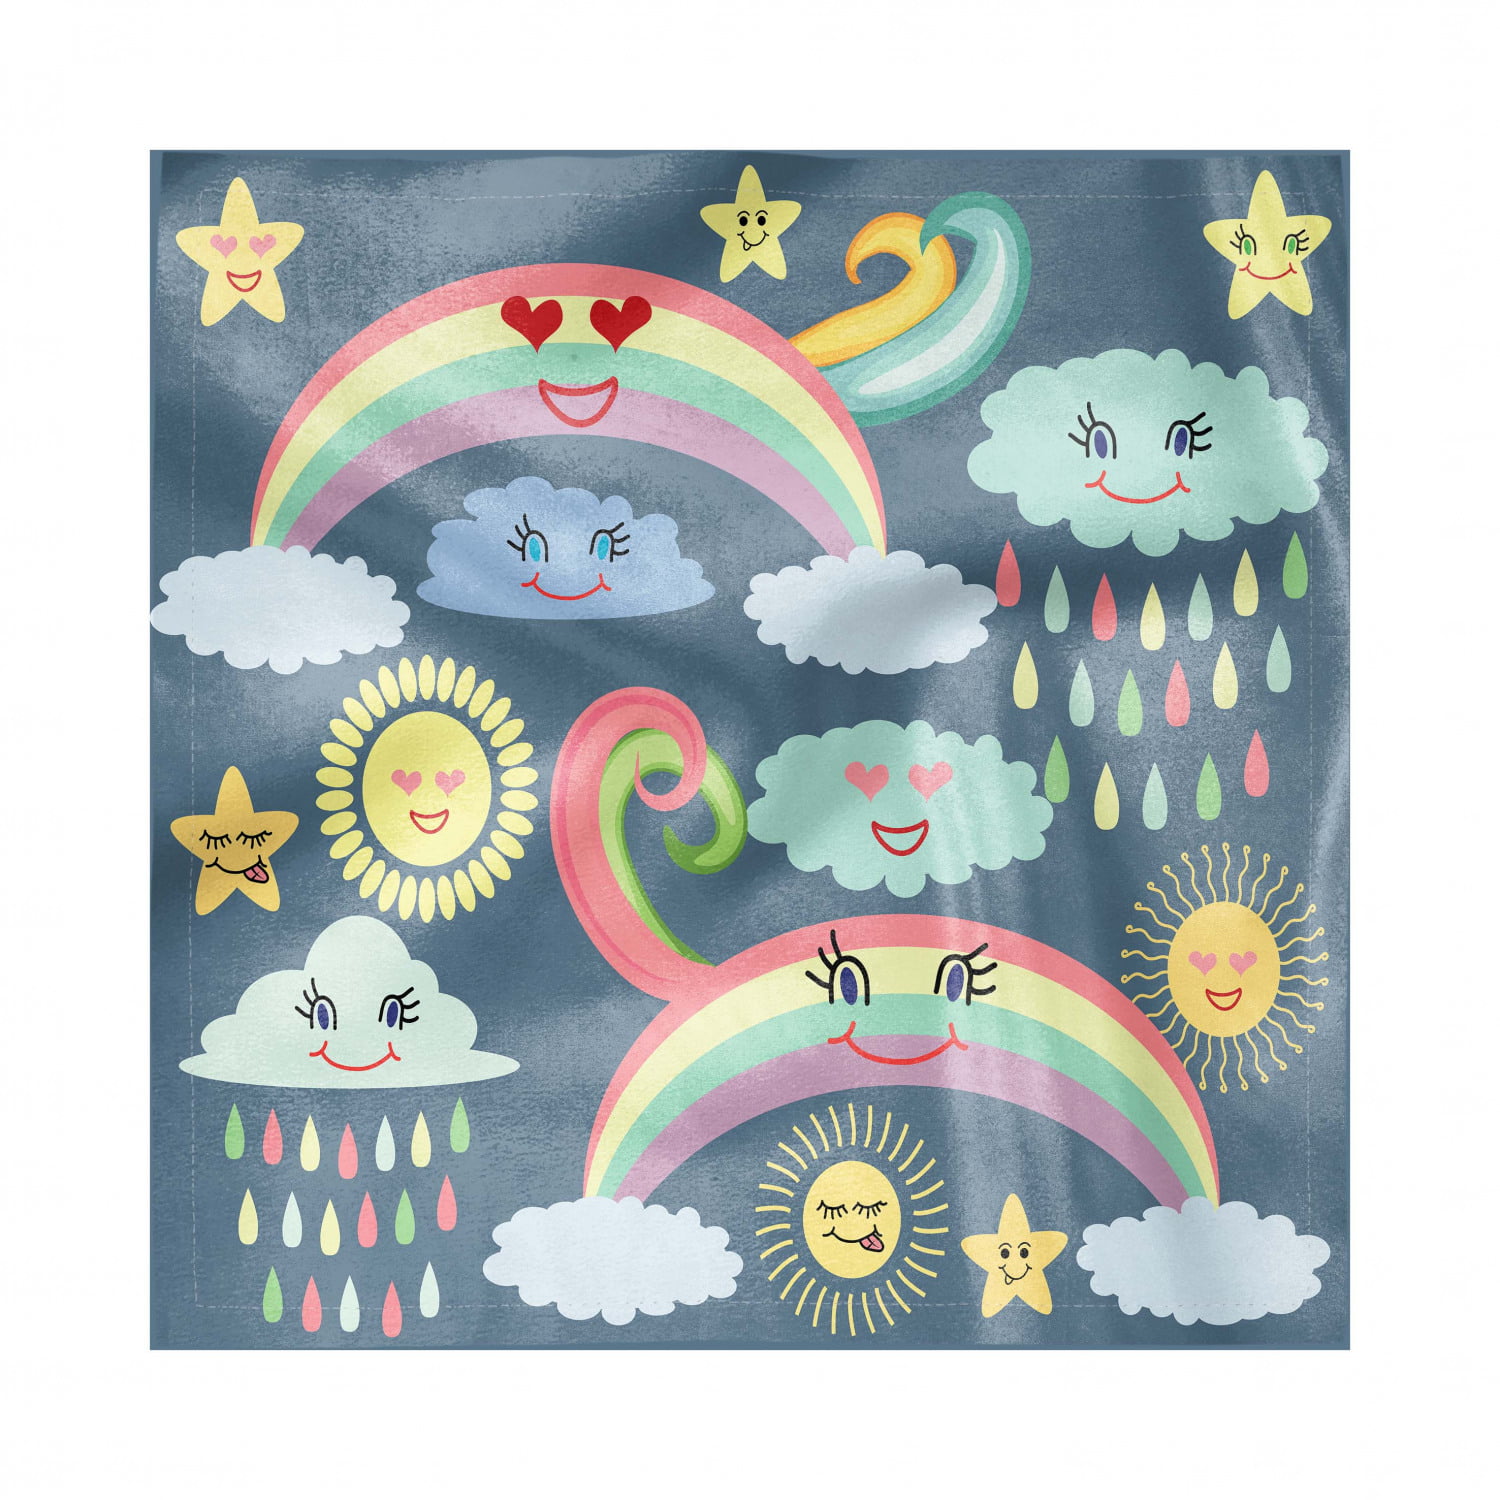 Multicolor Standard Size Ambesonne Rain Place Mats Set of 4 Nursery Theme Joyful Weather and Sky Concept Such as Rainbows Clouds and Stars Washable Fabric Placemats for Dining Table